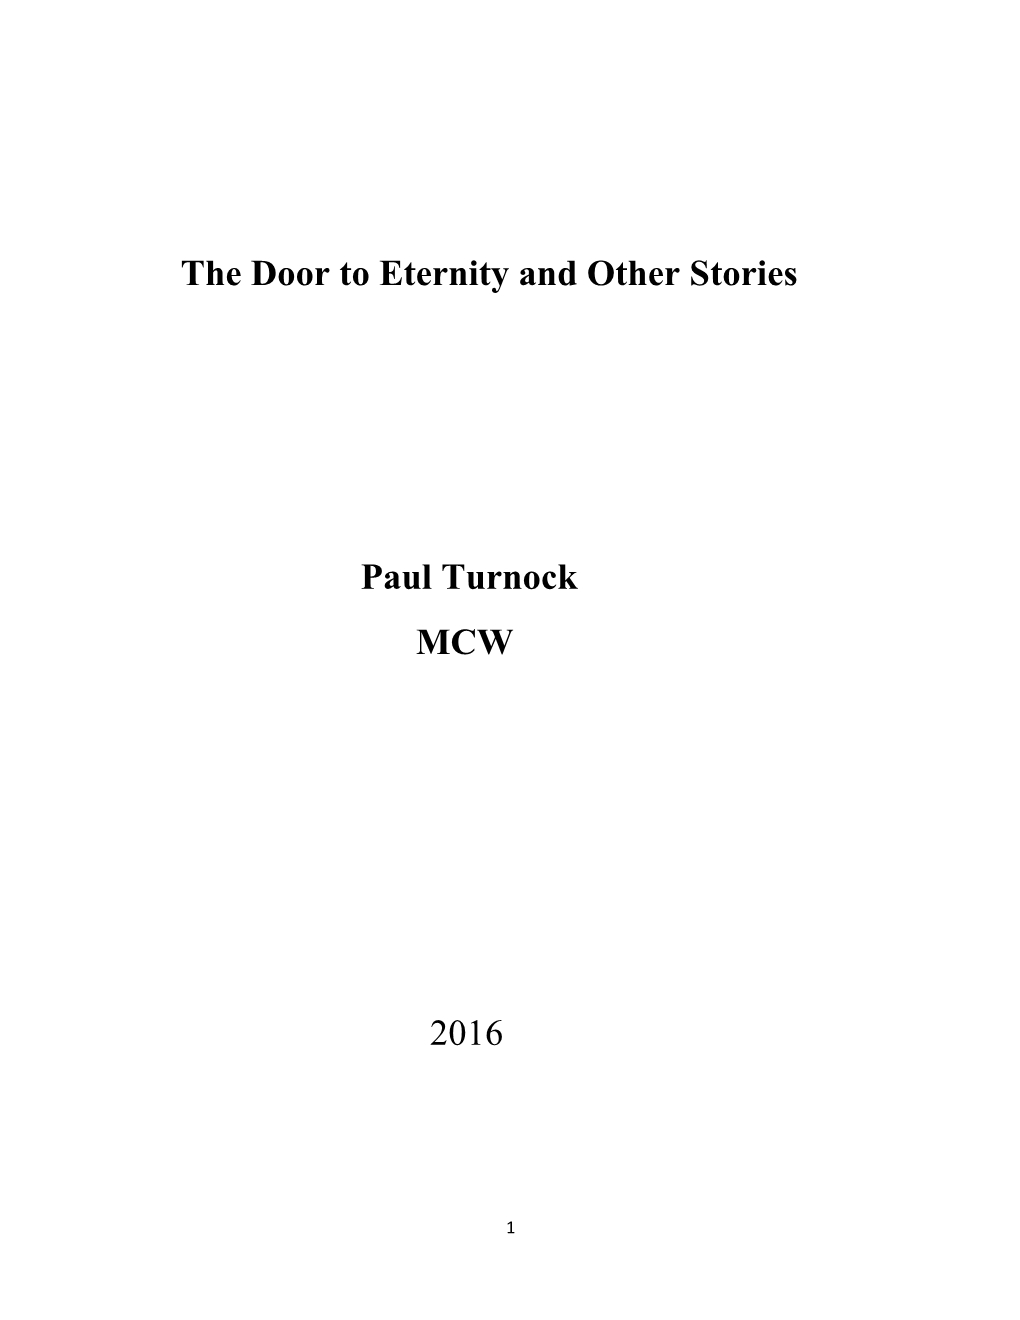 The Door to Eternity and Other Stories Paul Turnock MCW 2016